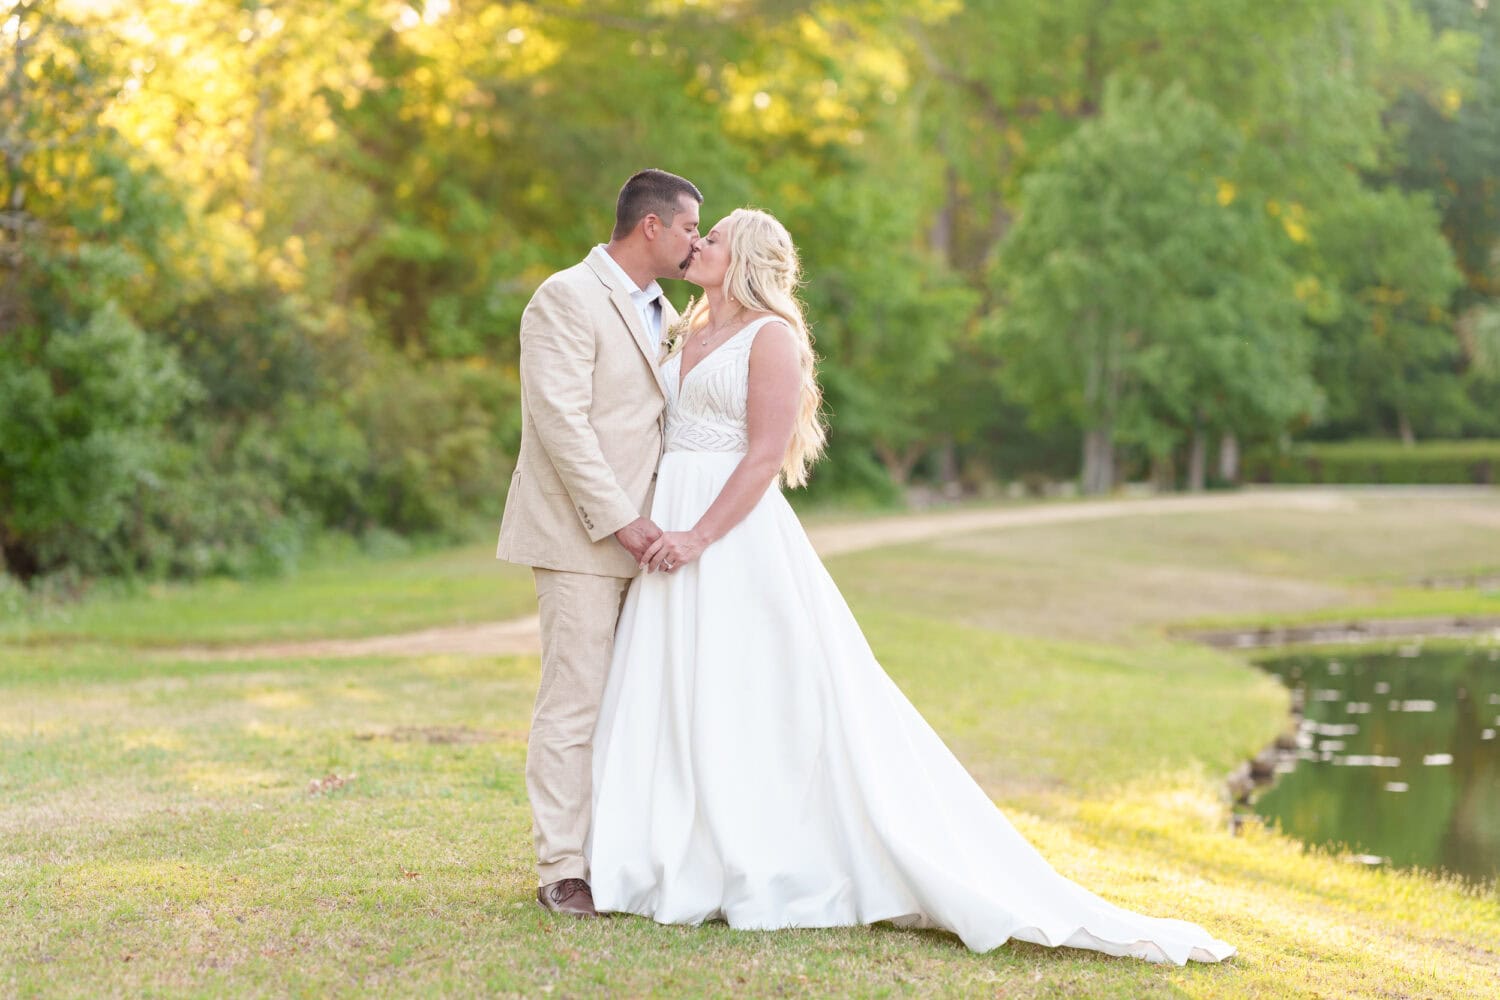 Portraits of the bride and groom by the lake behind the venue - The Village House at Litchfield